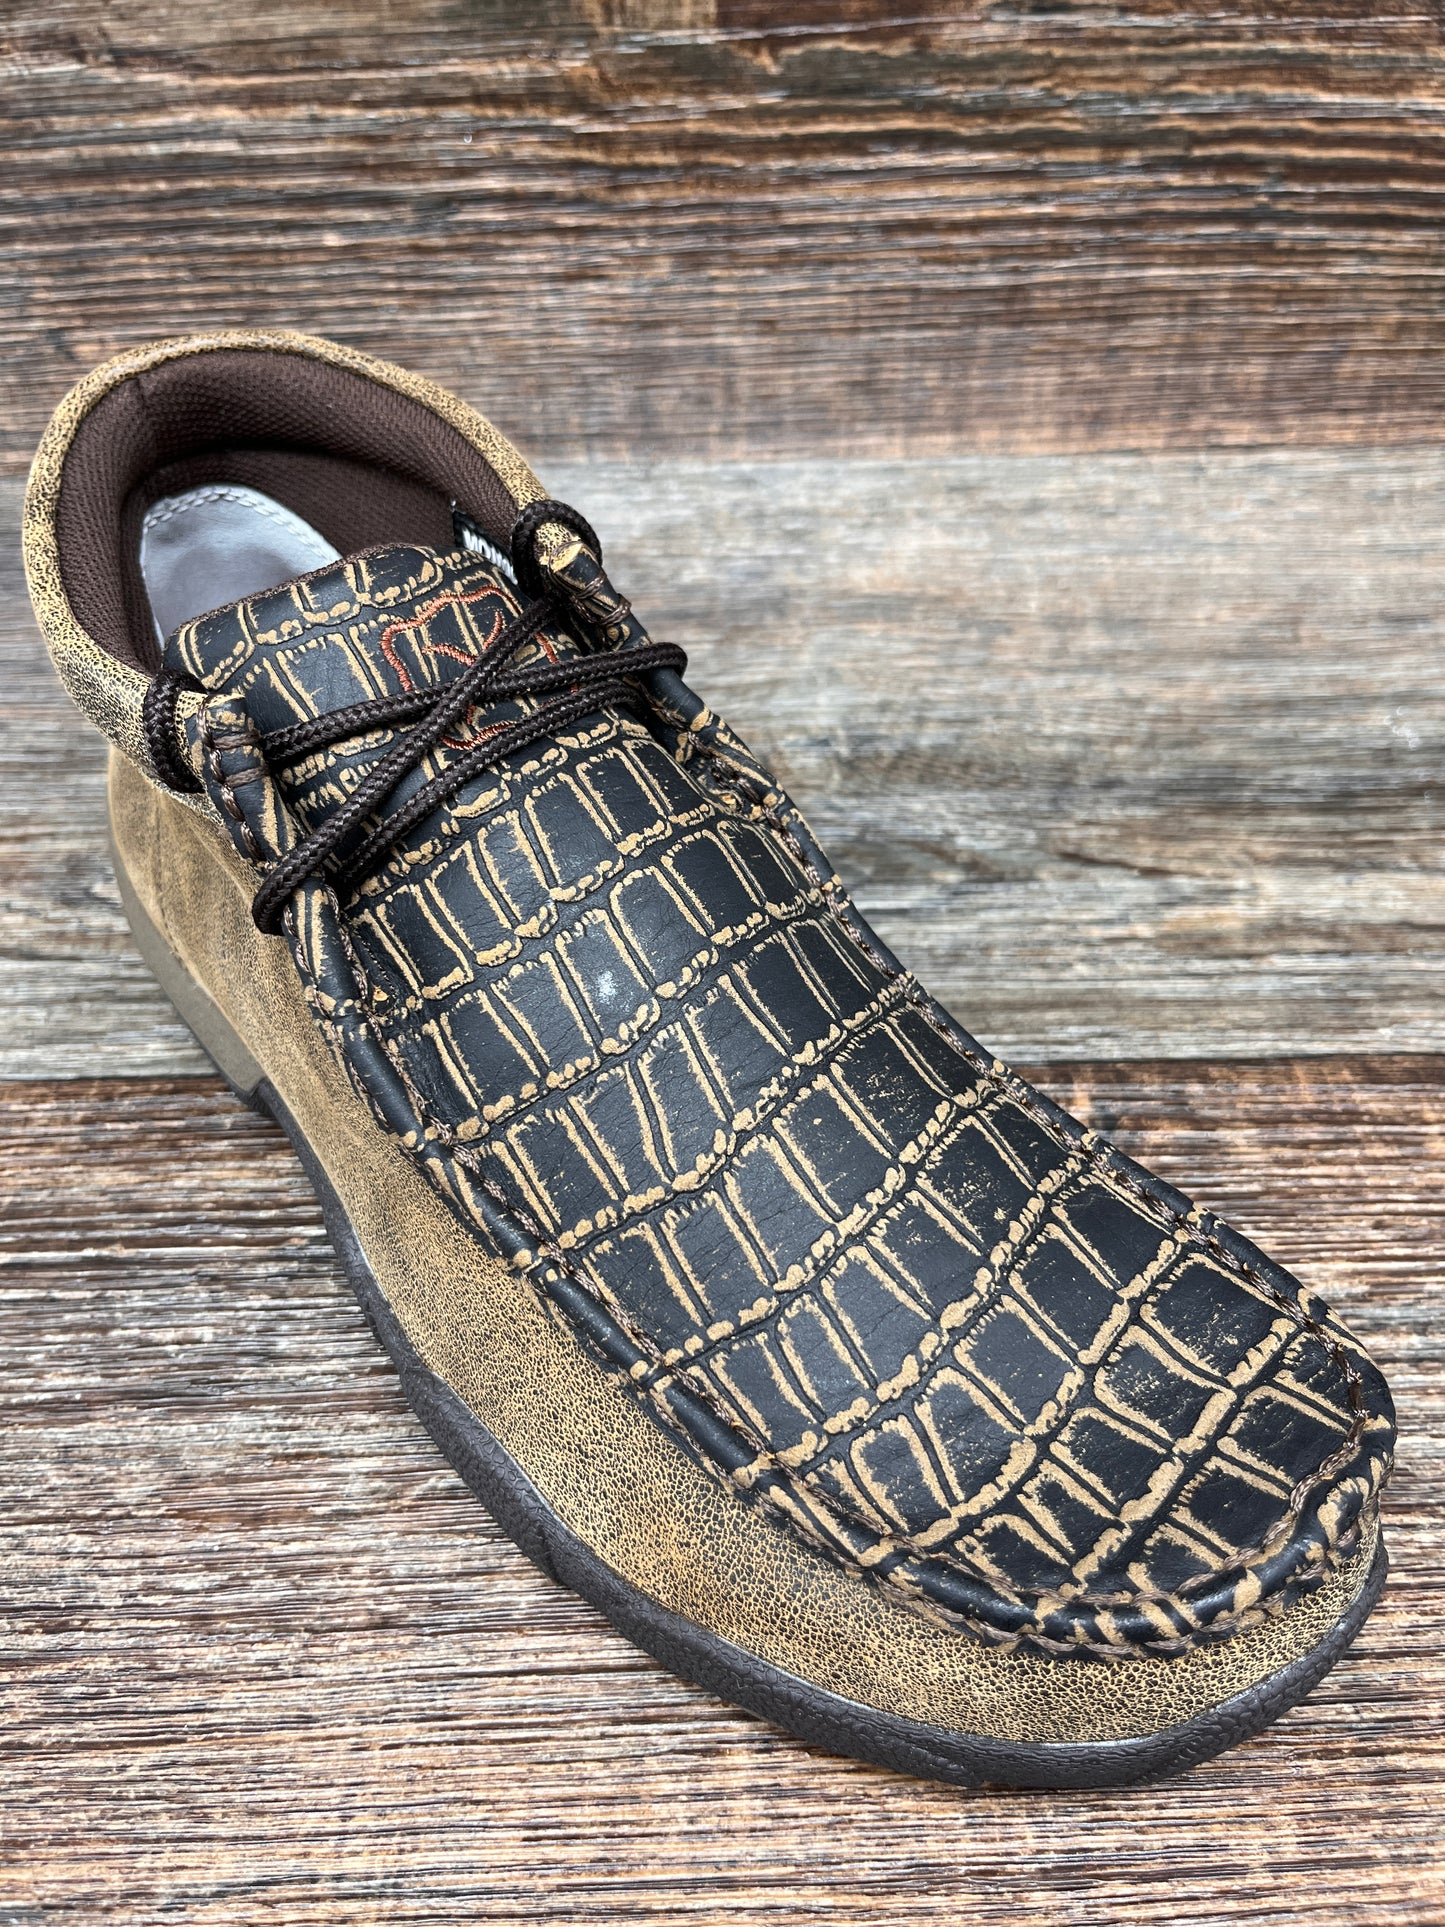 mdm0067 Men's Gator Print Driving Moc Casual Shoe by Twisted X